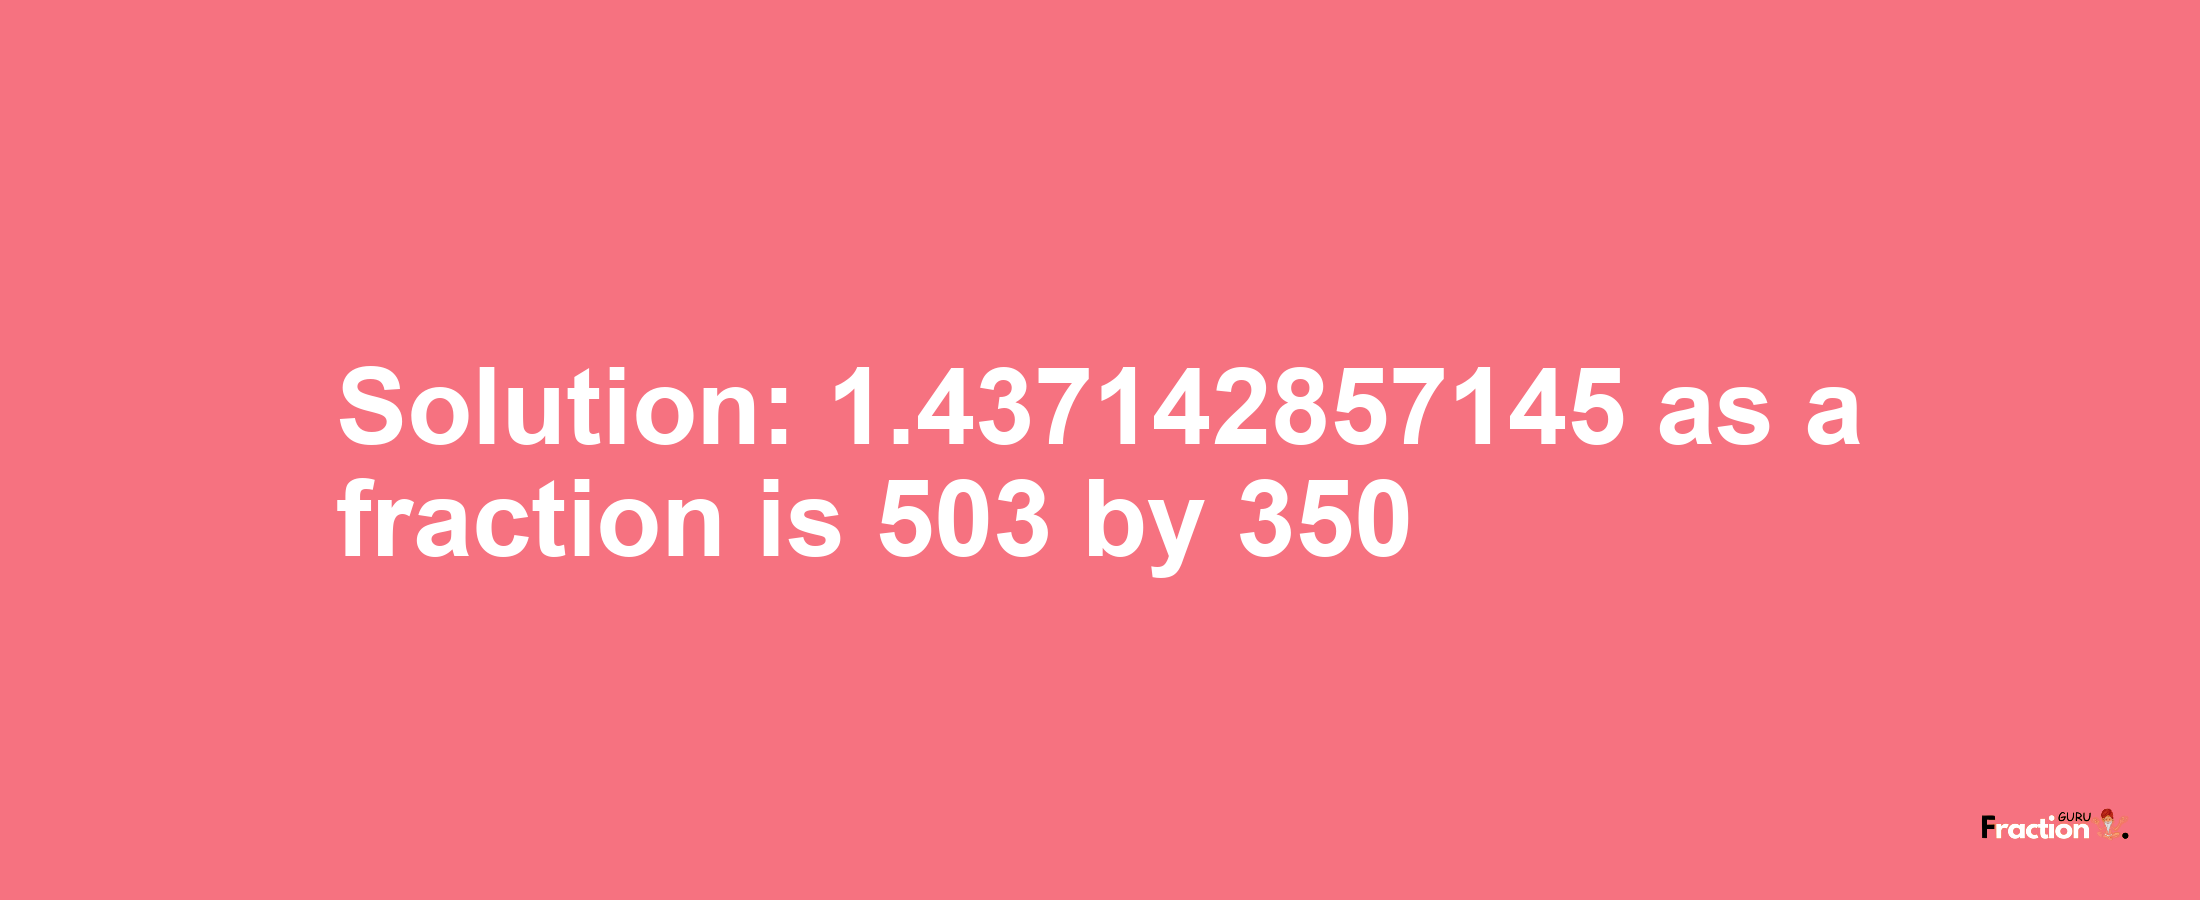 Solution:1.437142857145 as a fraction is 503/350